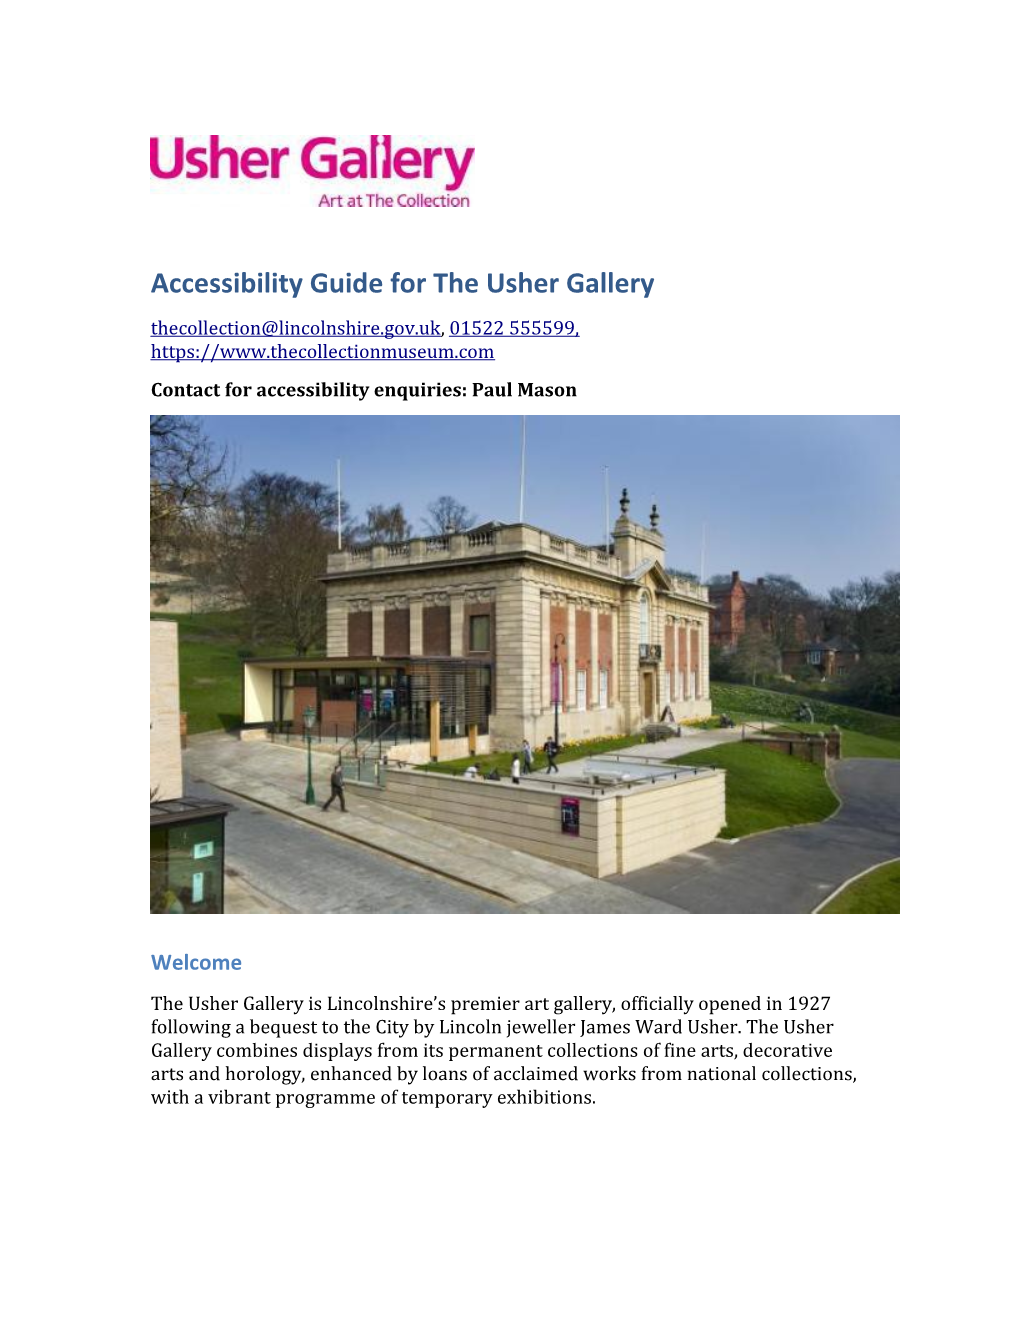 Accessibility Guide for the Usher Gallery